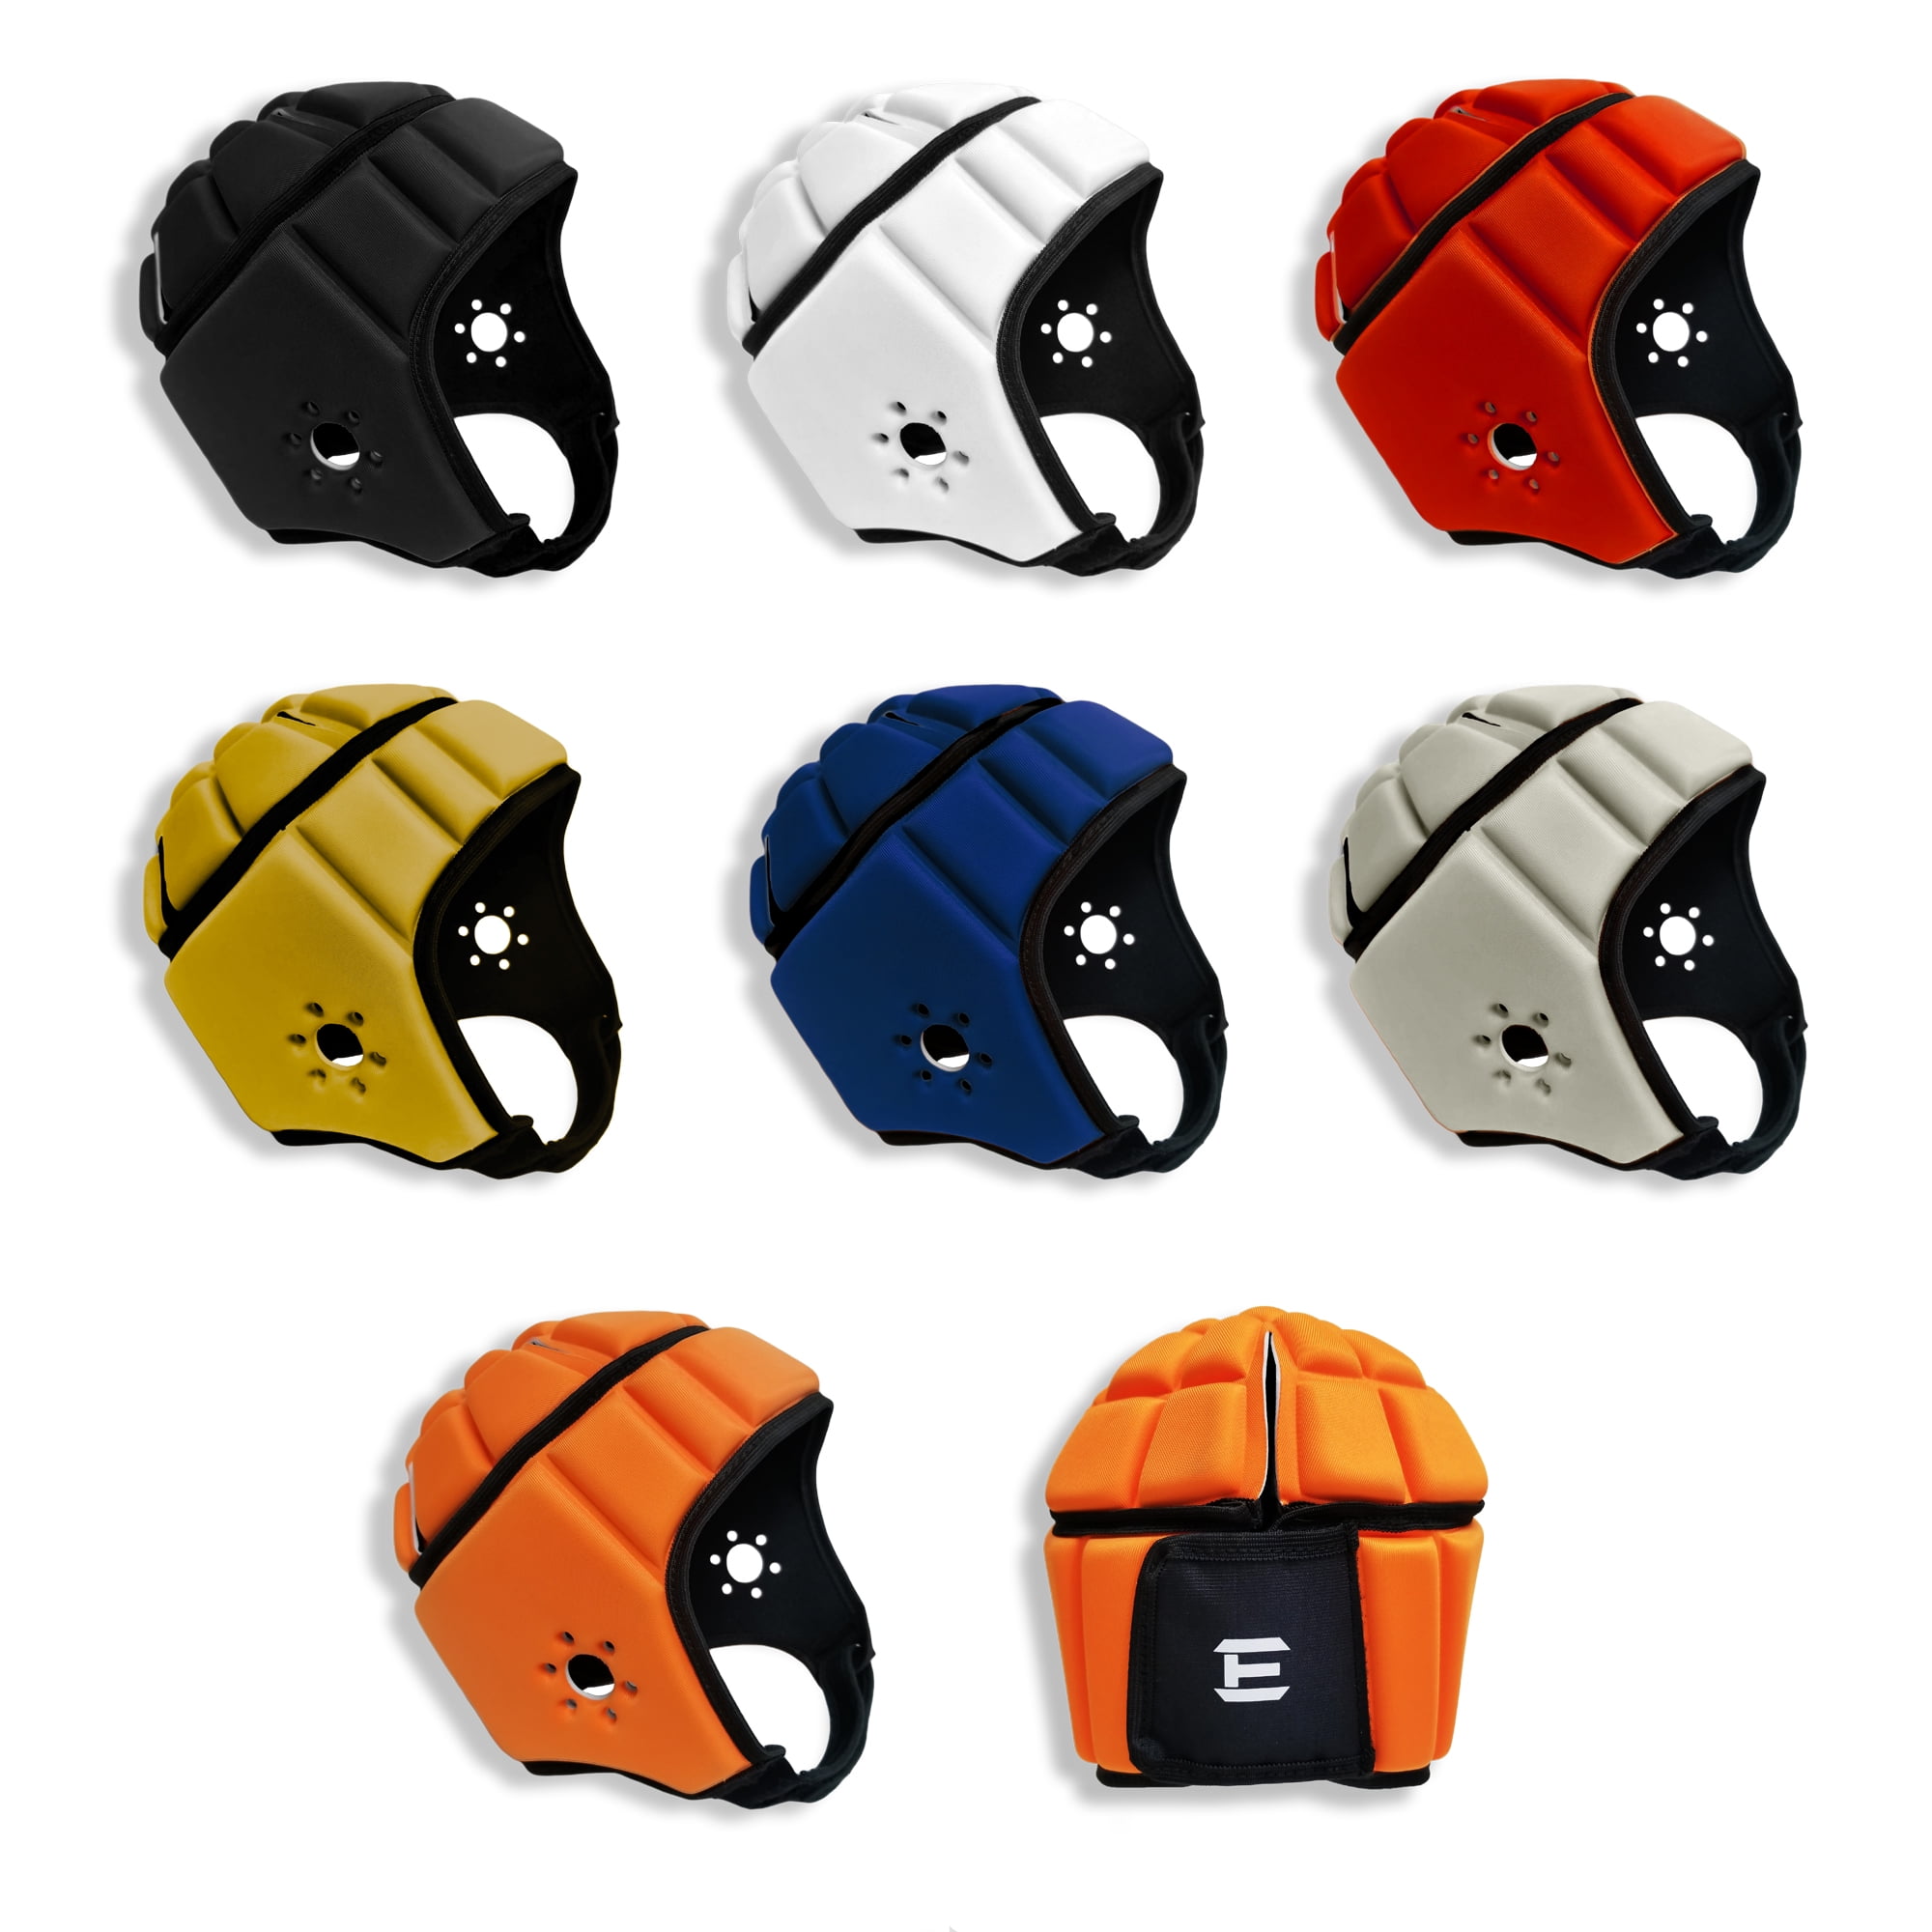 Adult Soccer Rugby Flag Football Head Guard Gear Protect Helmet Protector Hat UK 